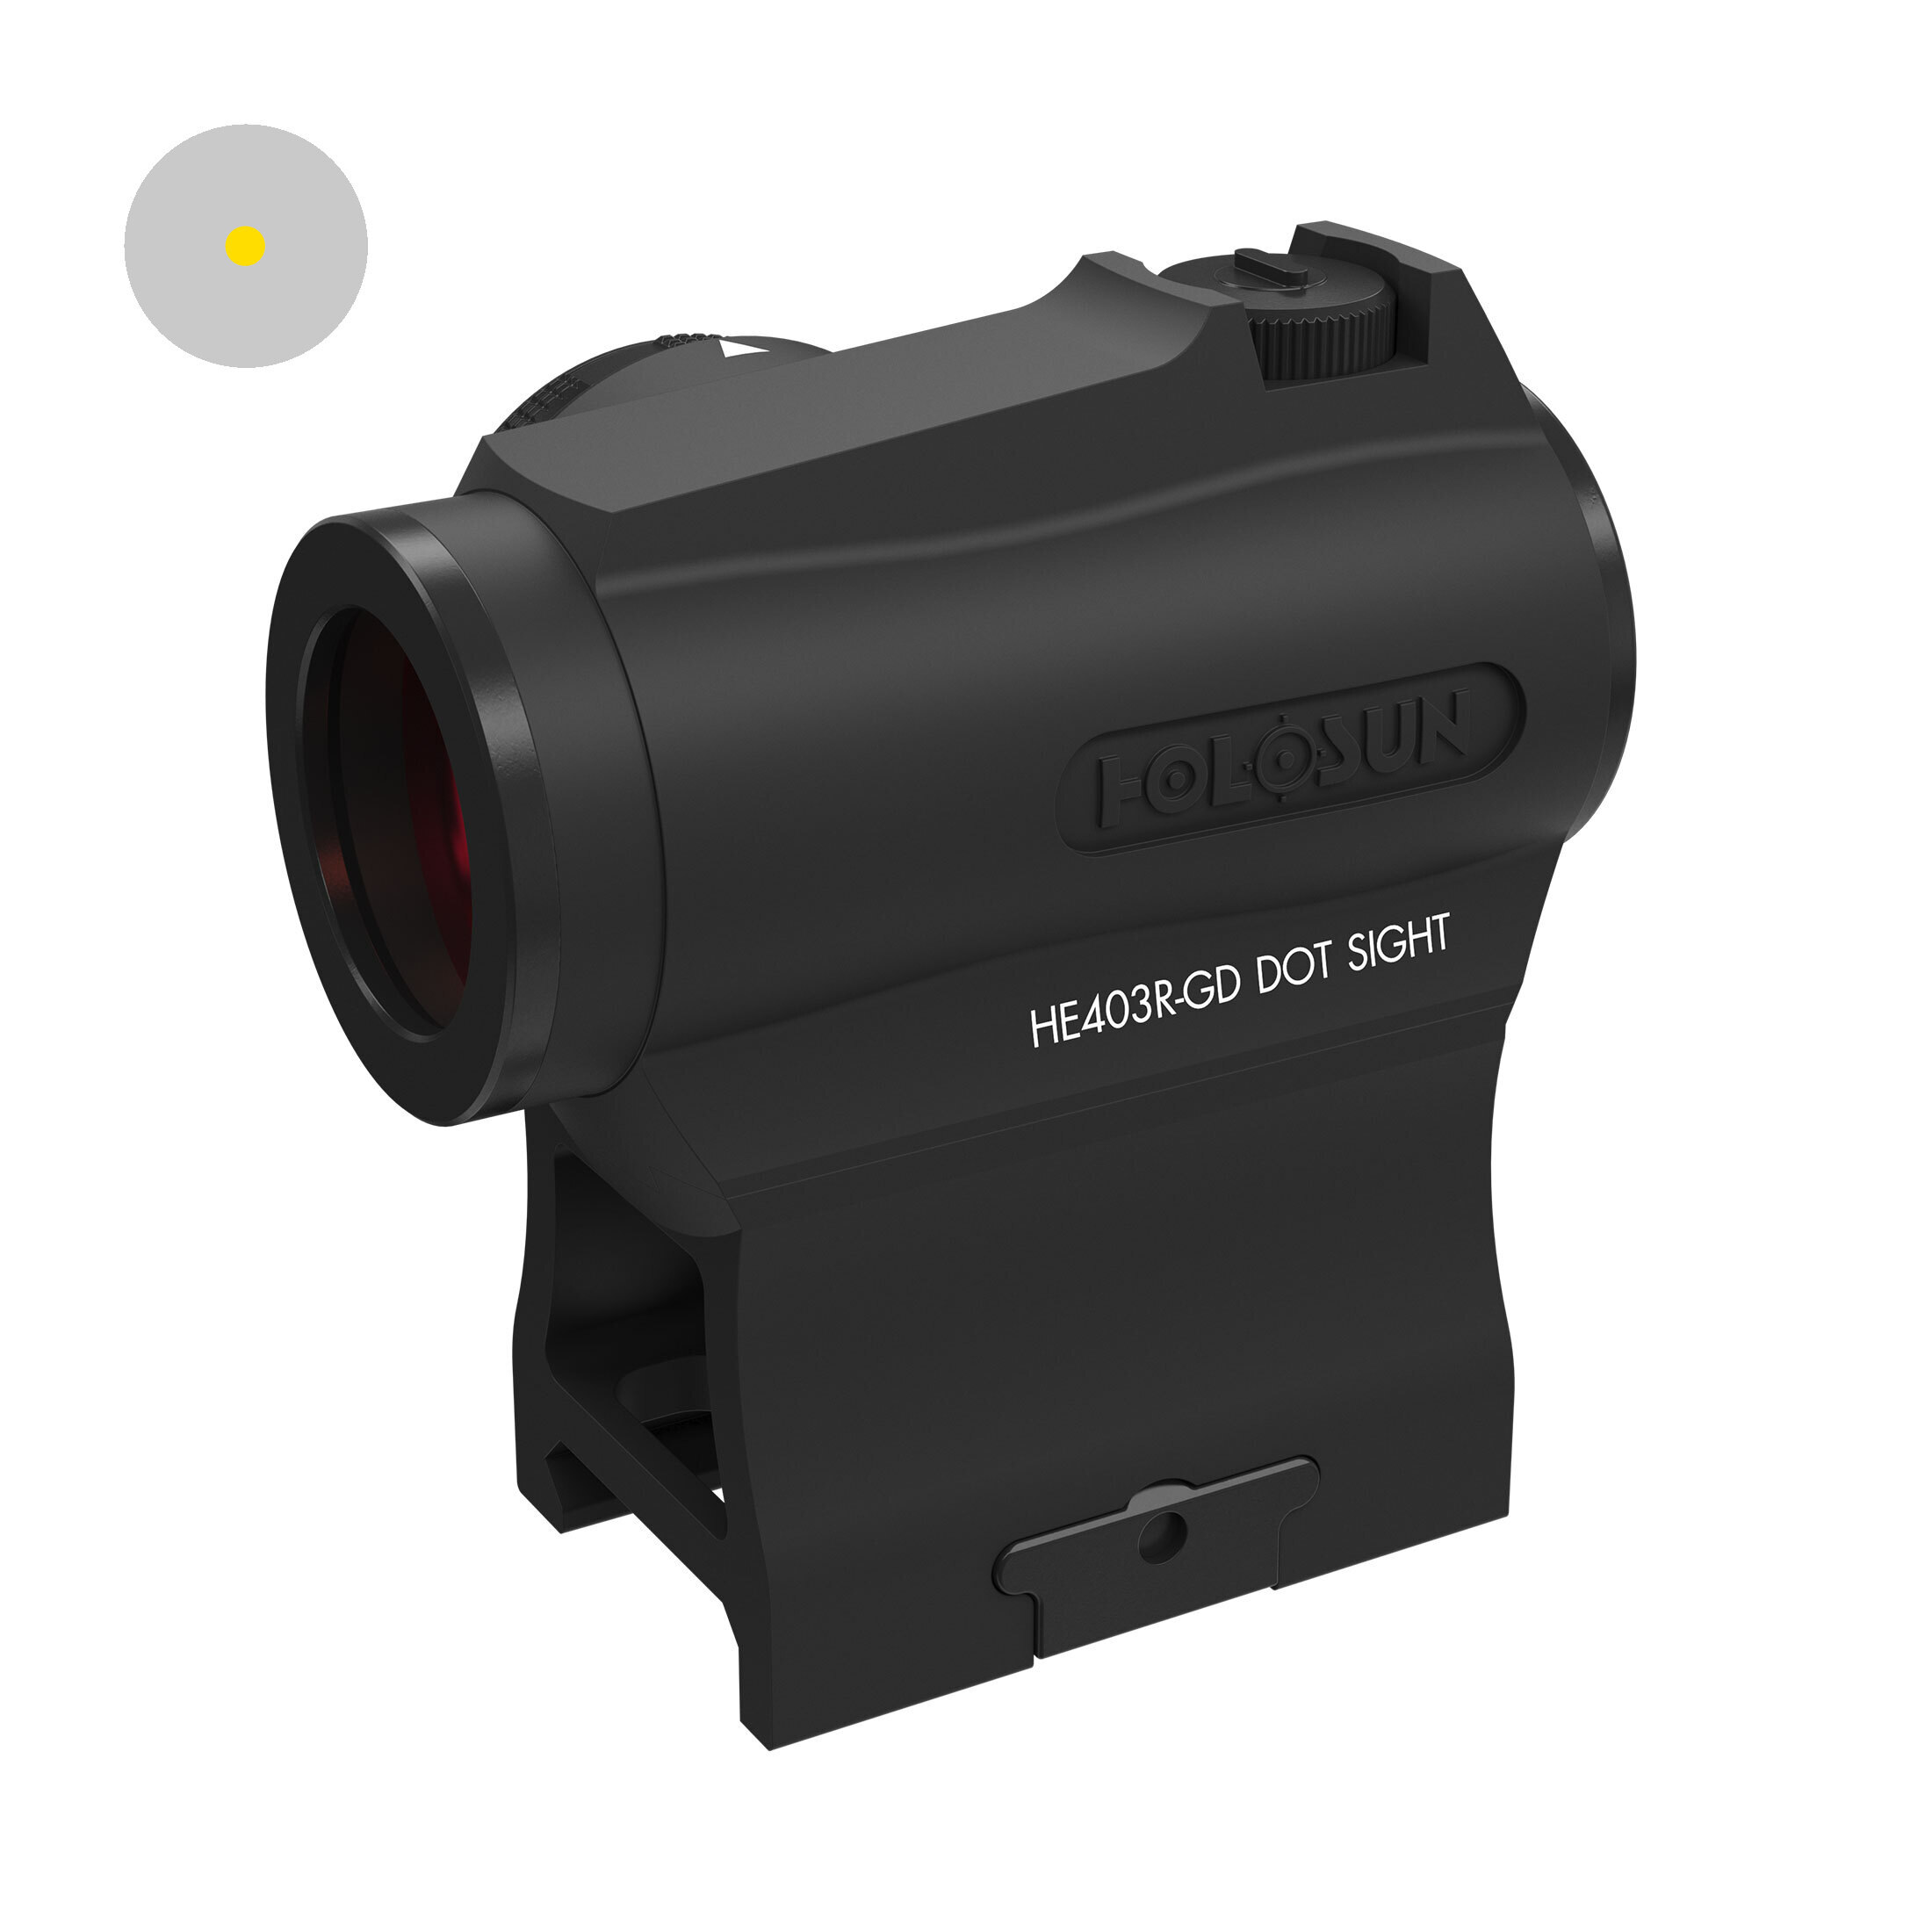 Holosun ELITE HE403R-GD Microdot gold dot sight with 2MOA dot reticle, new rheostat dial to adjust …